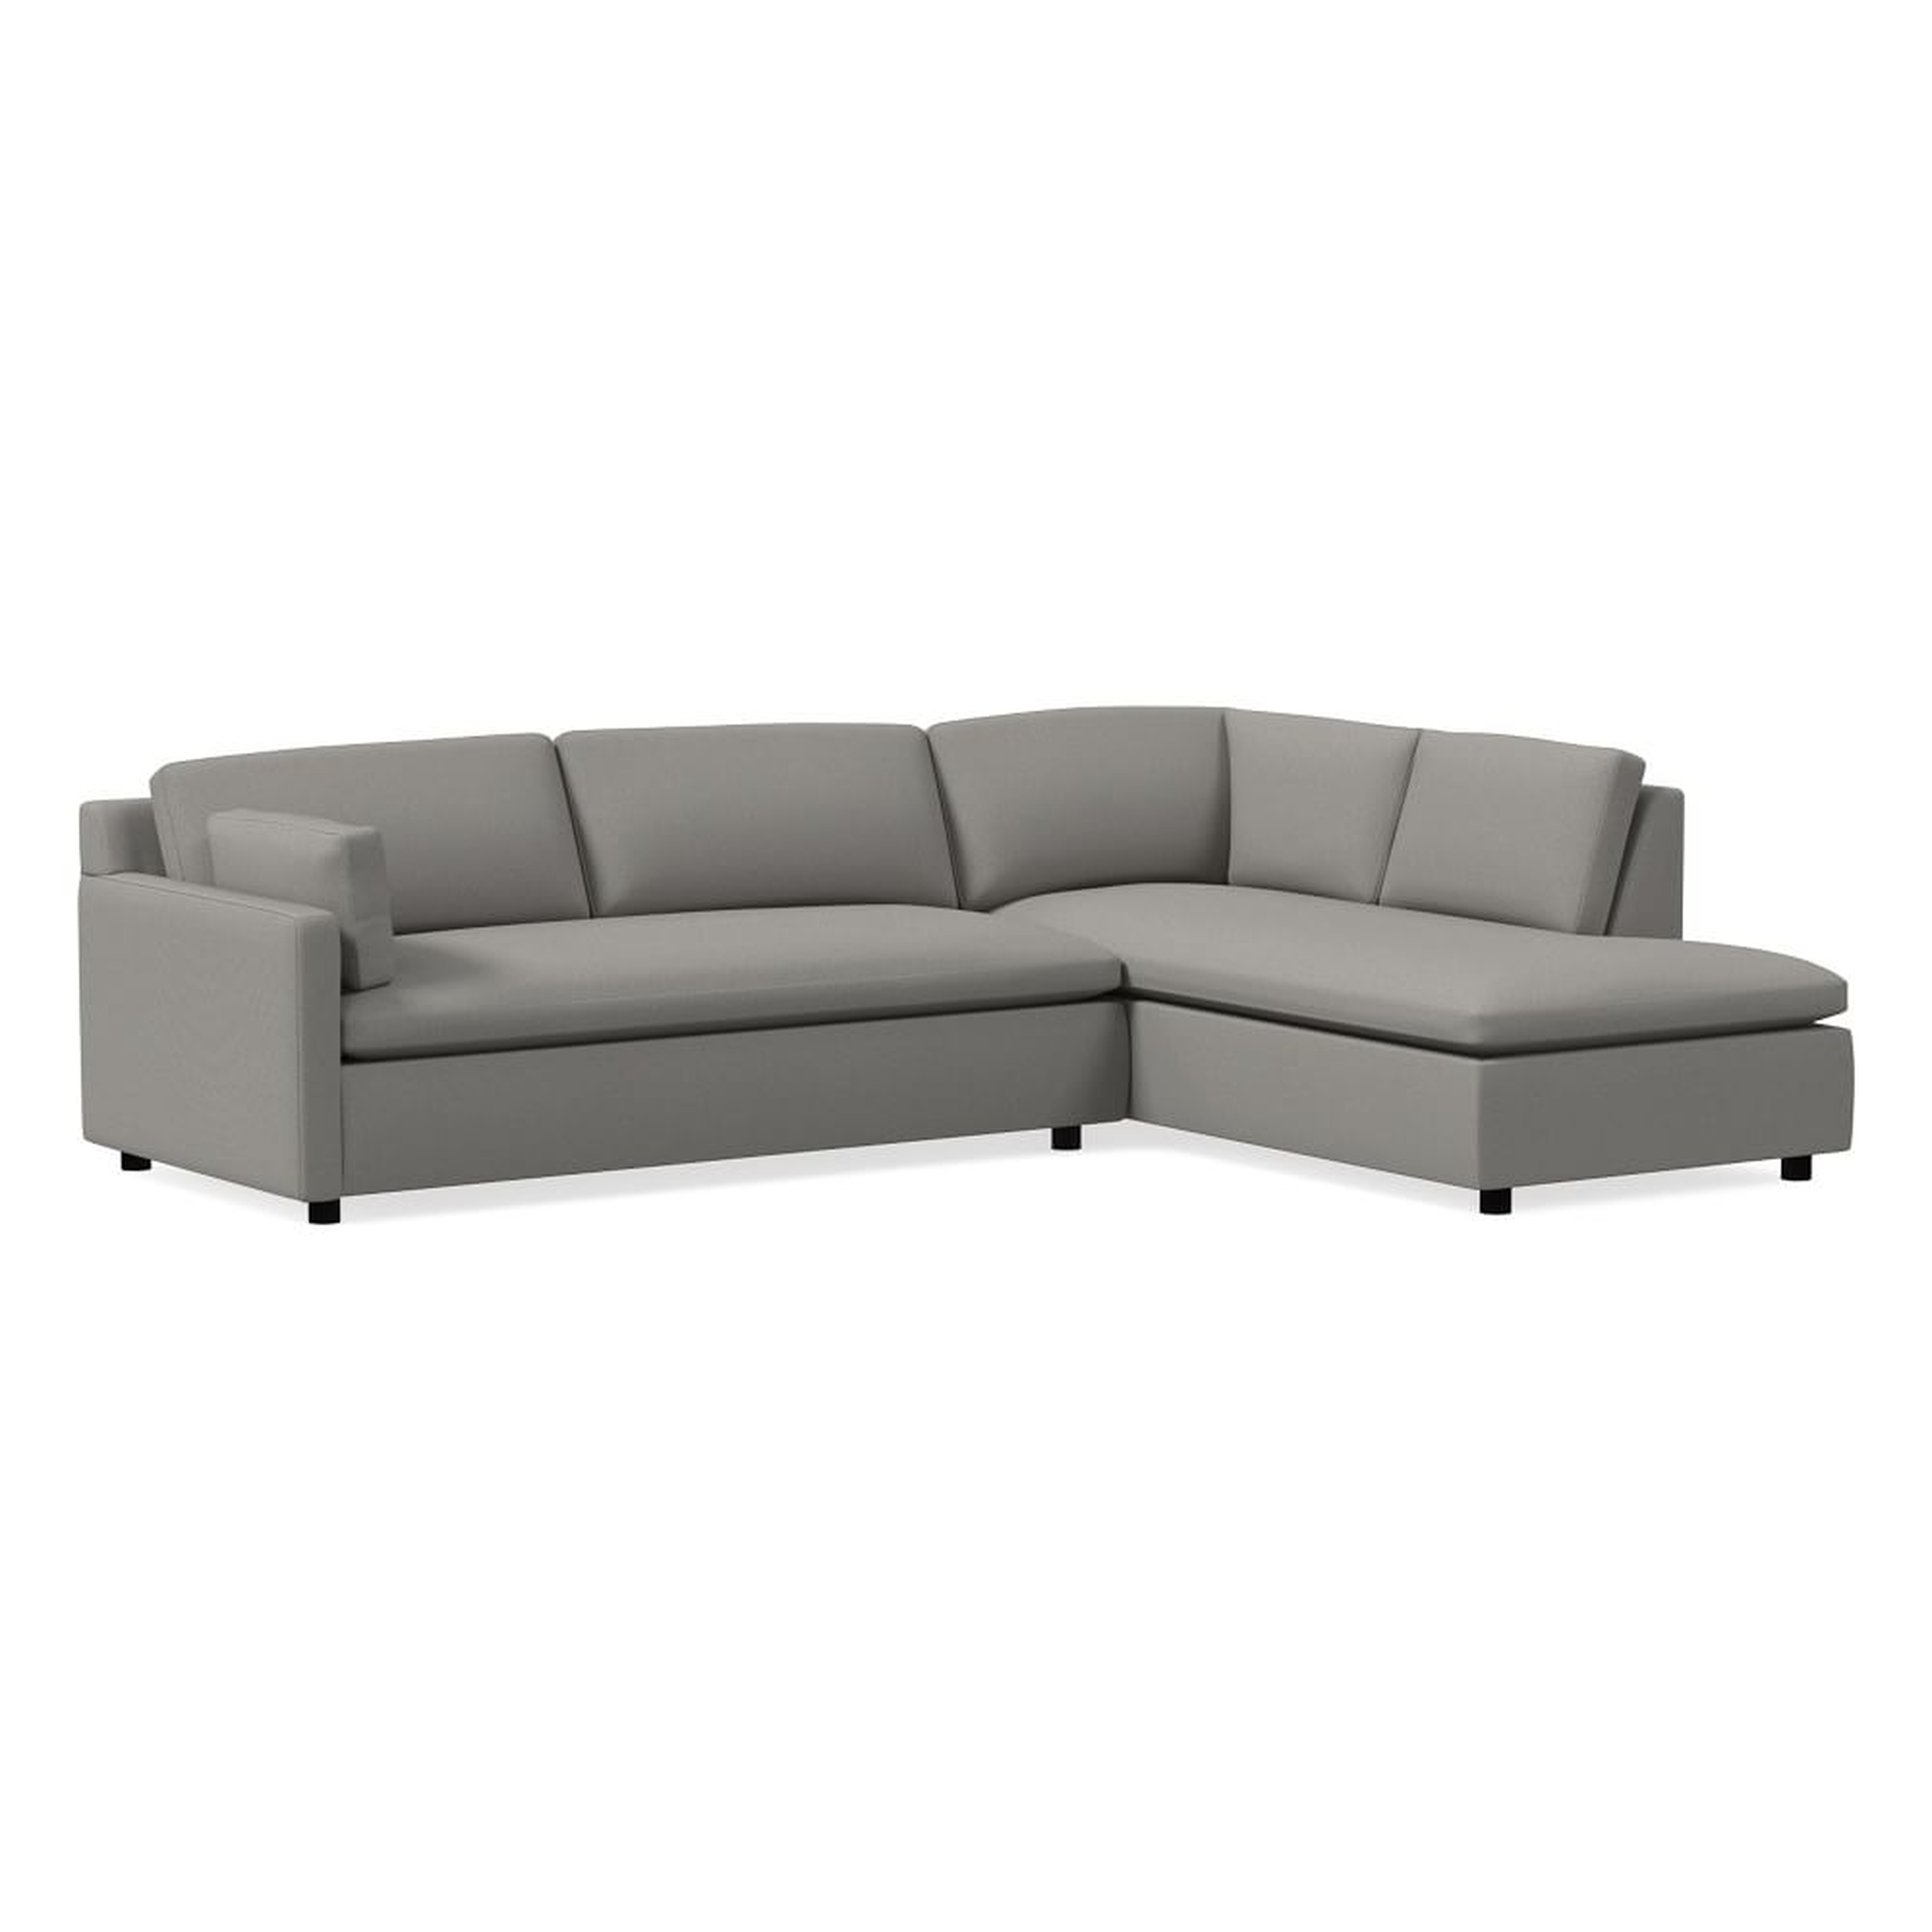 Marin 114" Right Bumper Chaise Sectional, Standard Depth, Performance Washed Canvas, Storm Gray - West Elm